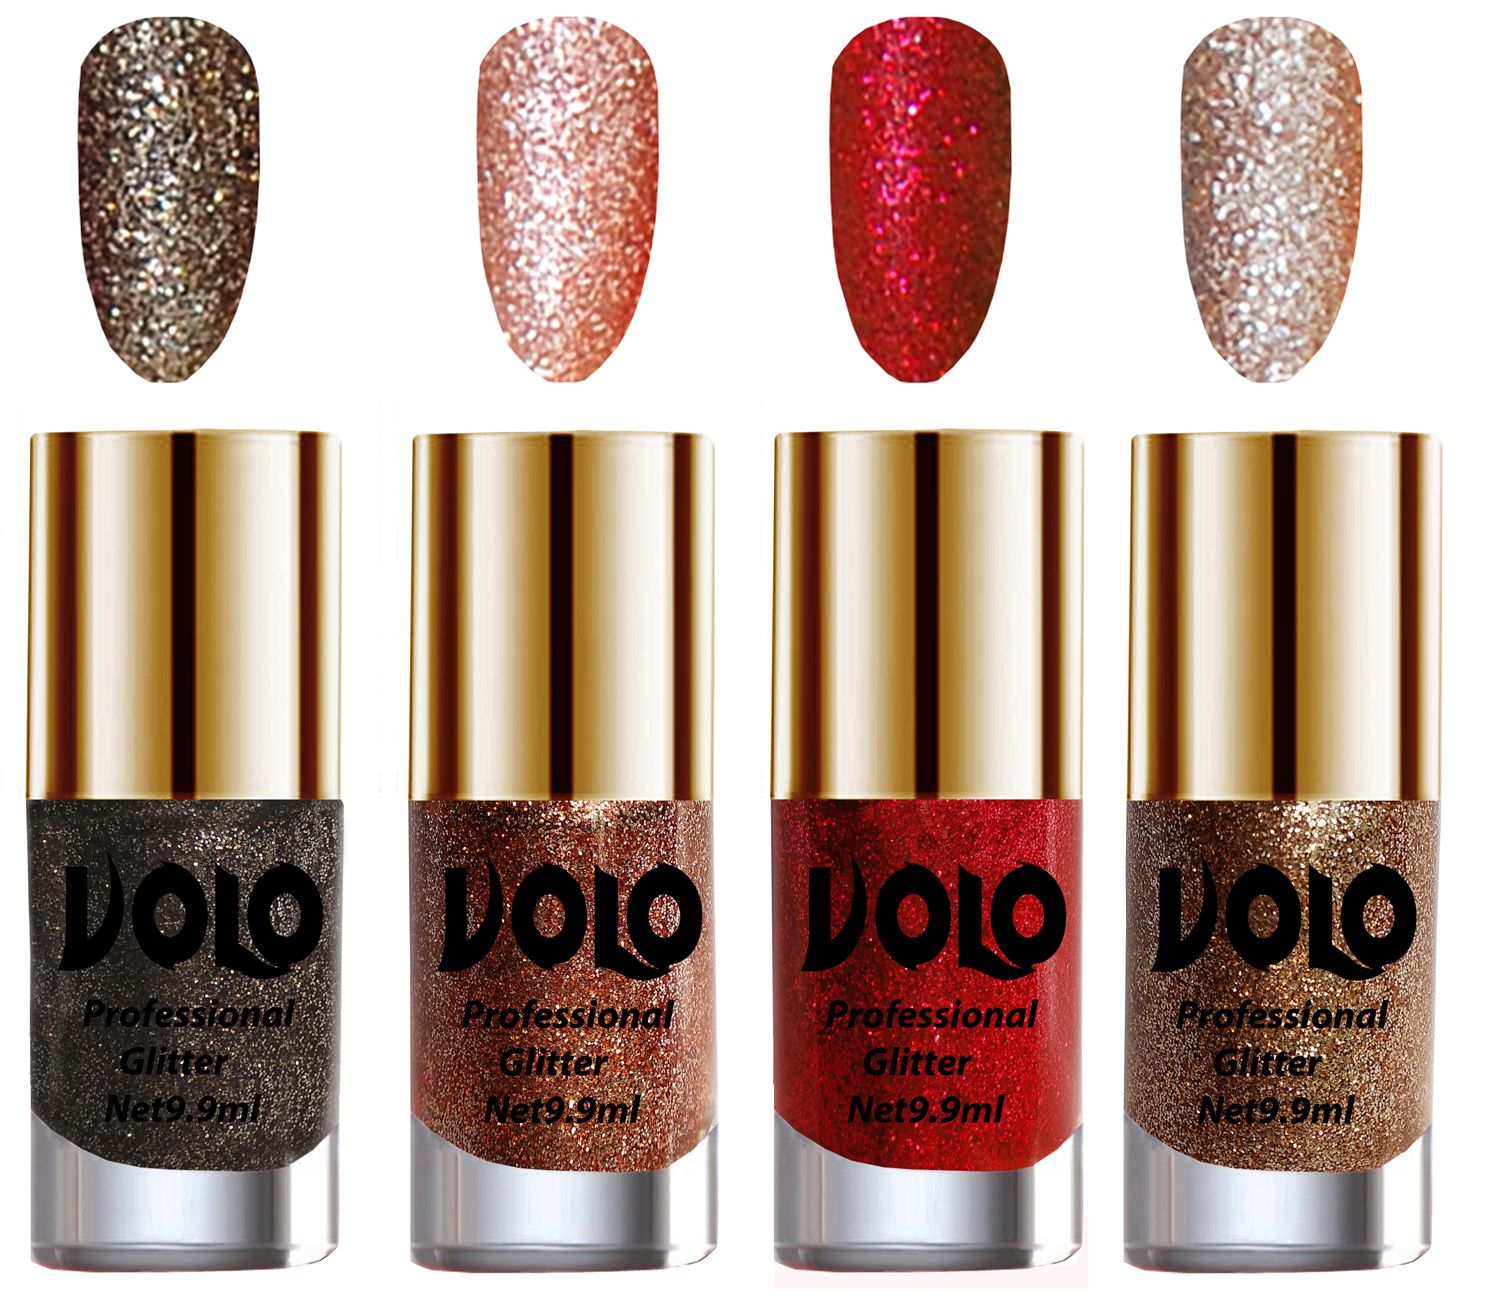     			VOLO Professionally Used Glitter Shine Nail Polish Grey,Peach,Red Gold Pack of 4 39 mL